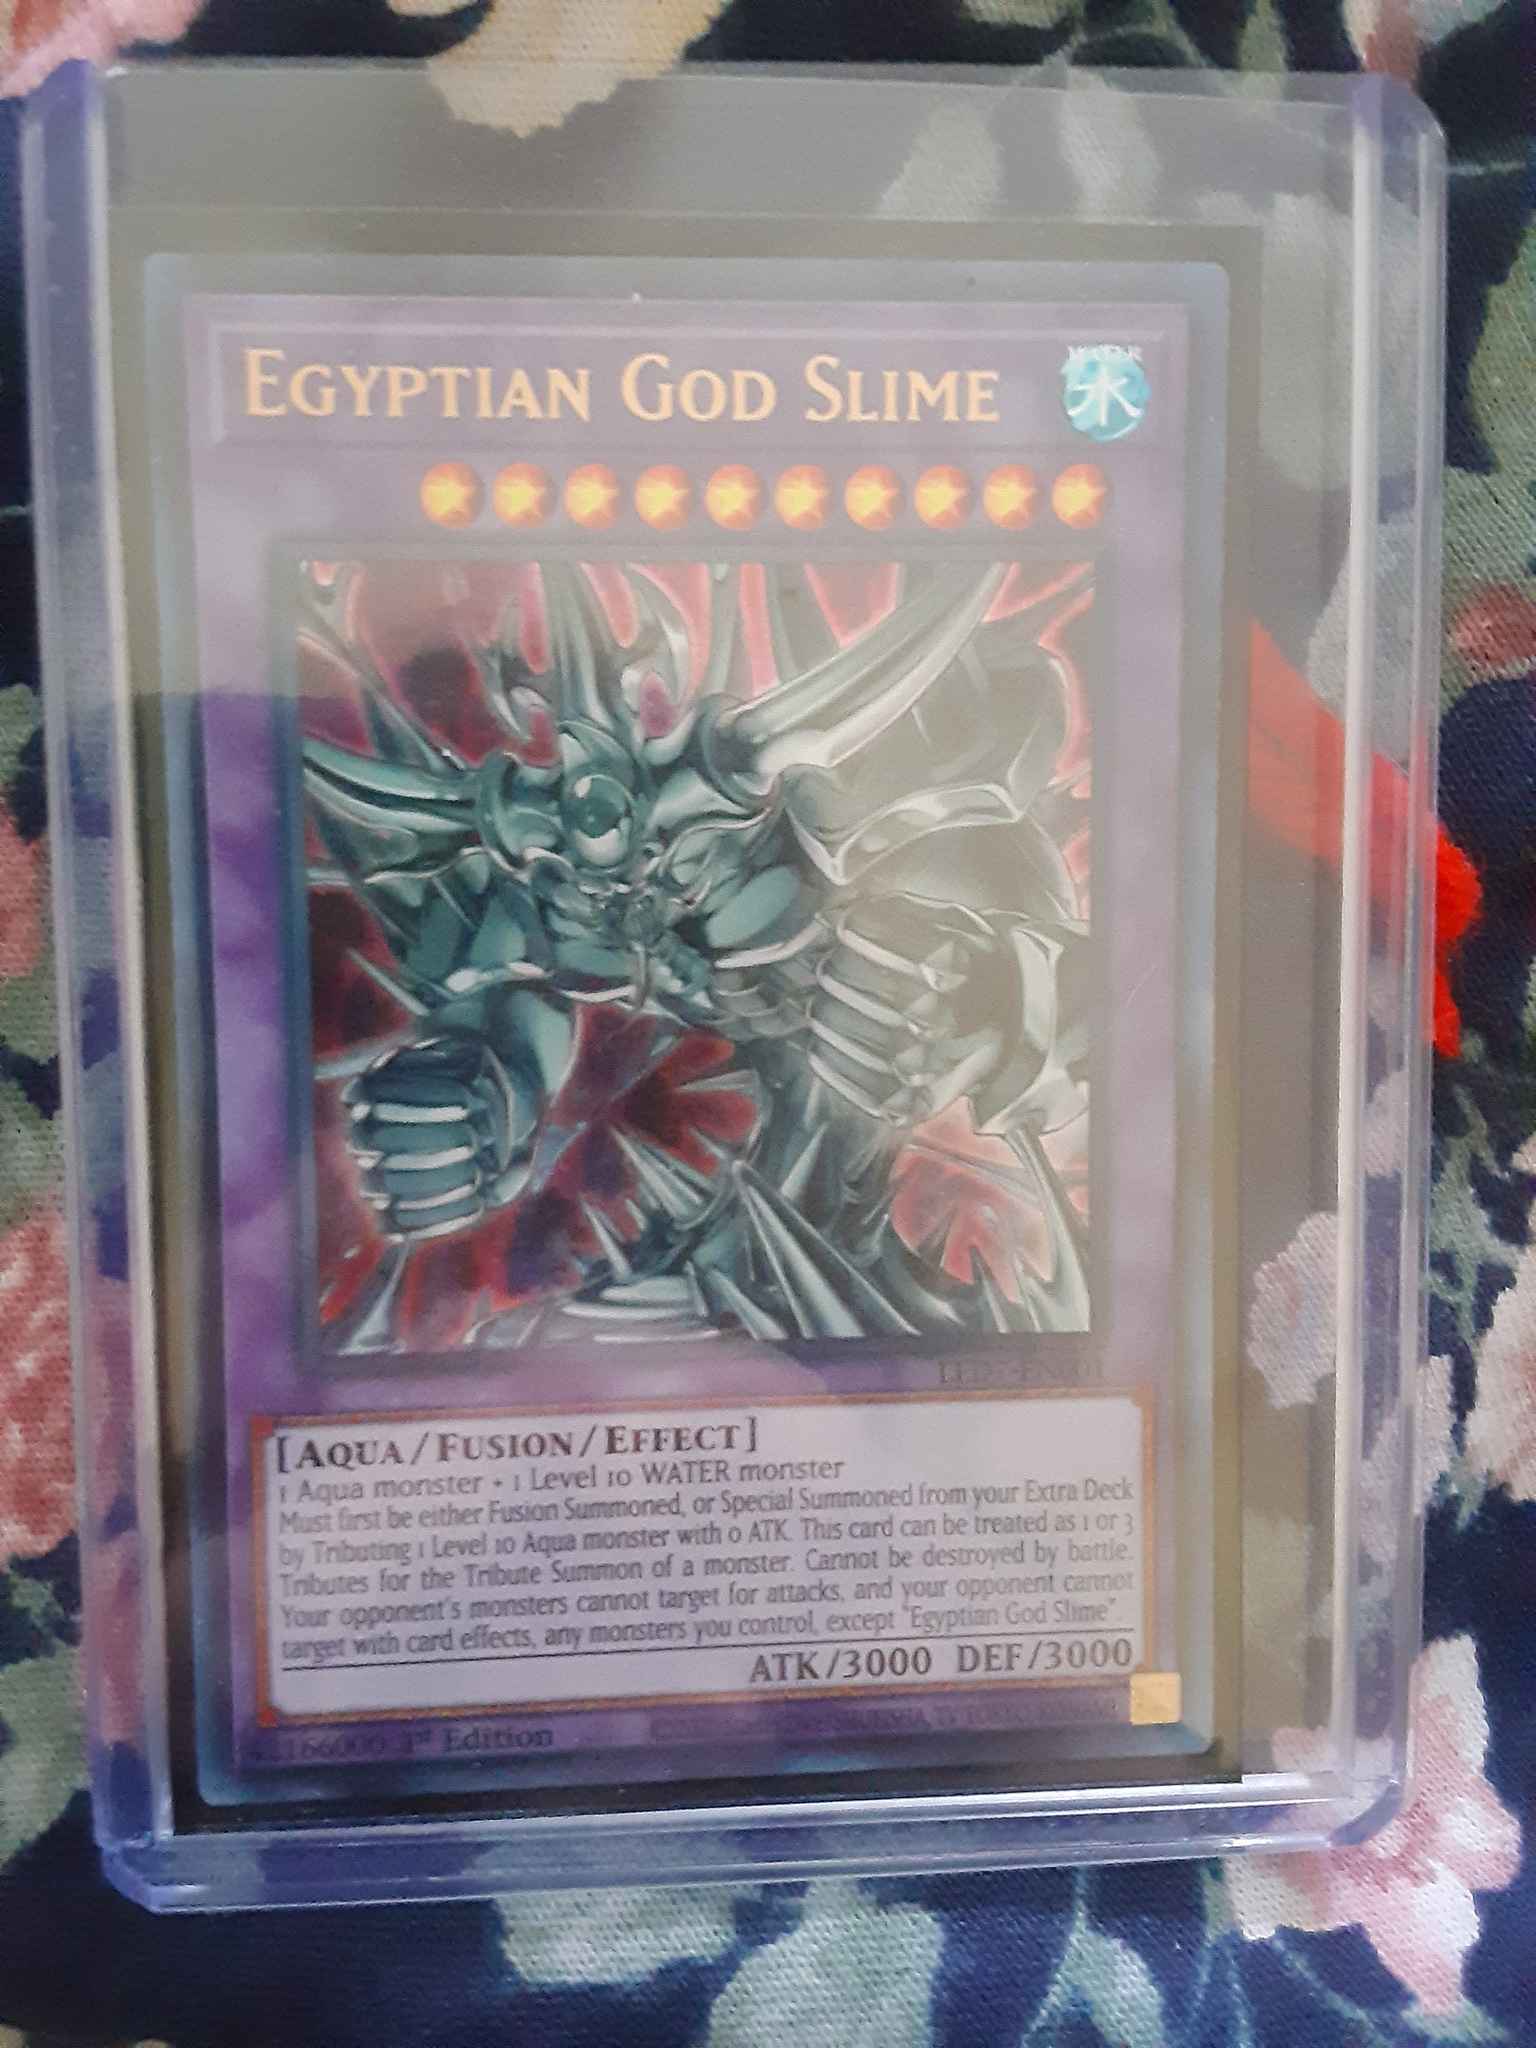 Egyptian God Slime Egyptian God Slime Legendary Duelists Rage Of Ra Yugioh Online Gaming Store For Cards Miniatures Singles Packs Booster Boxes